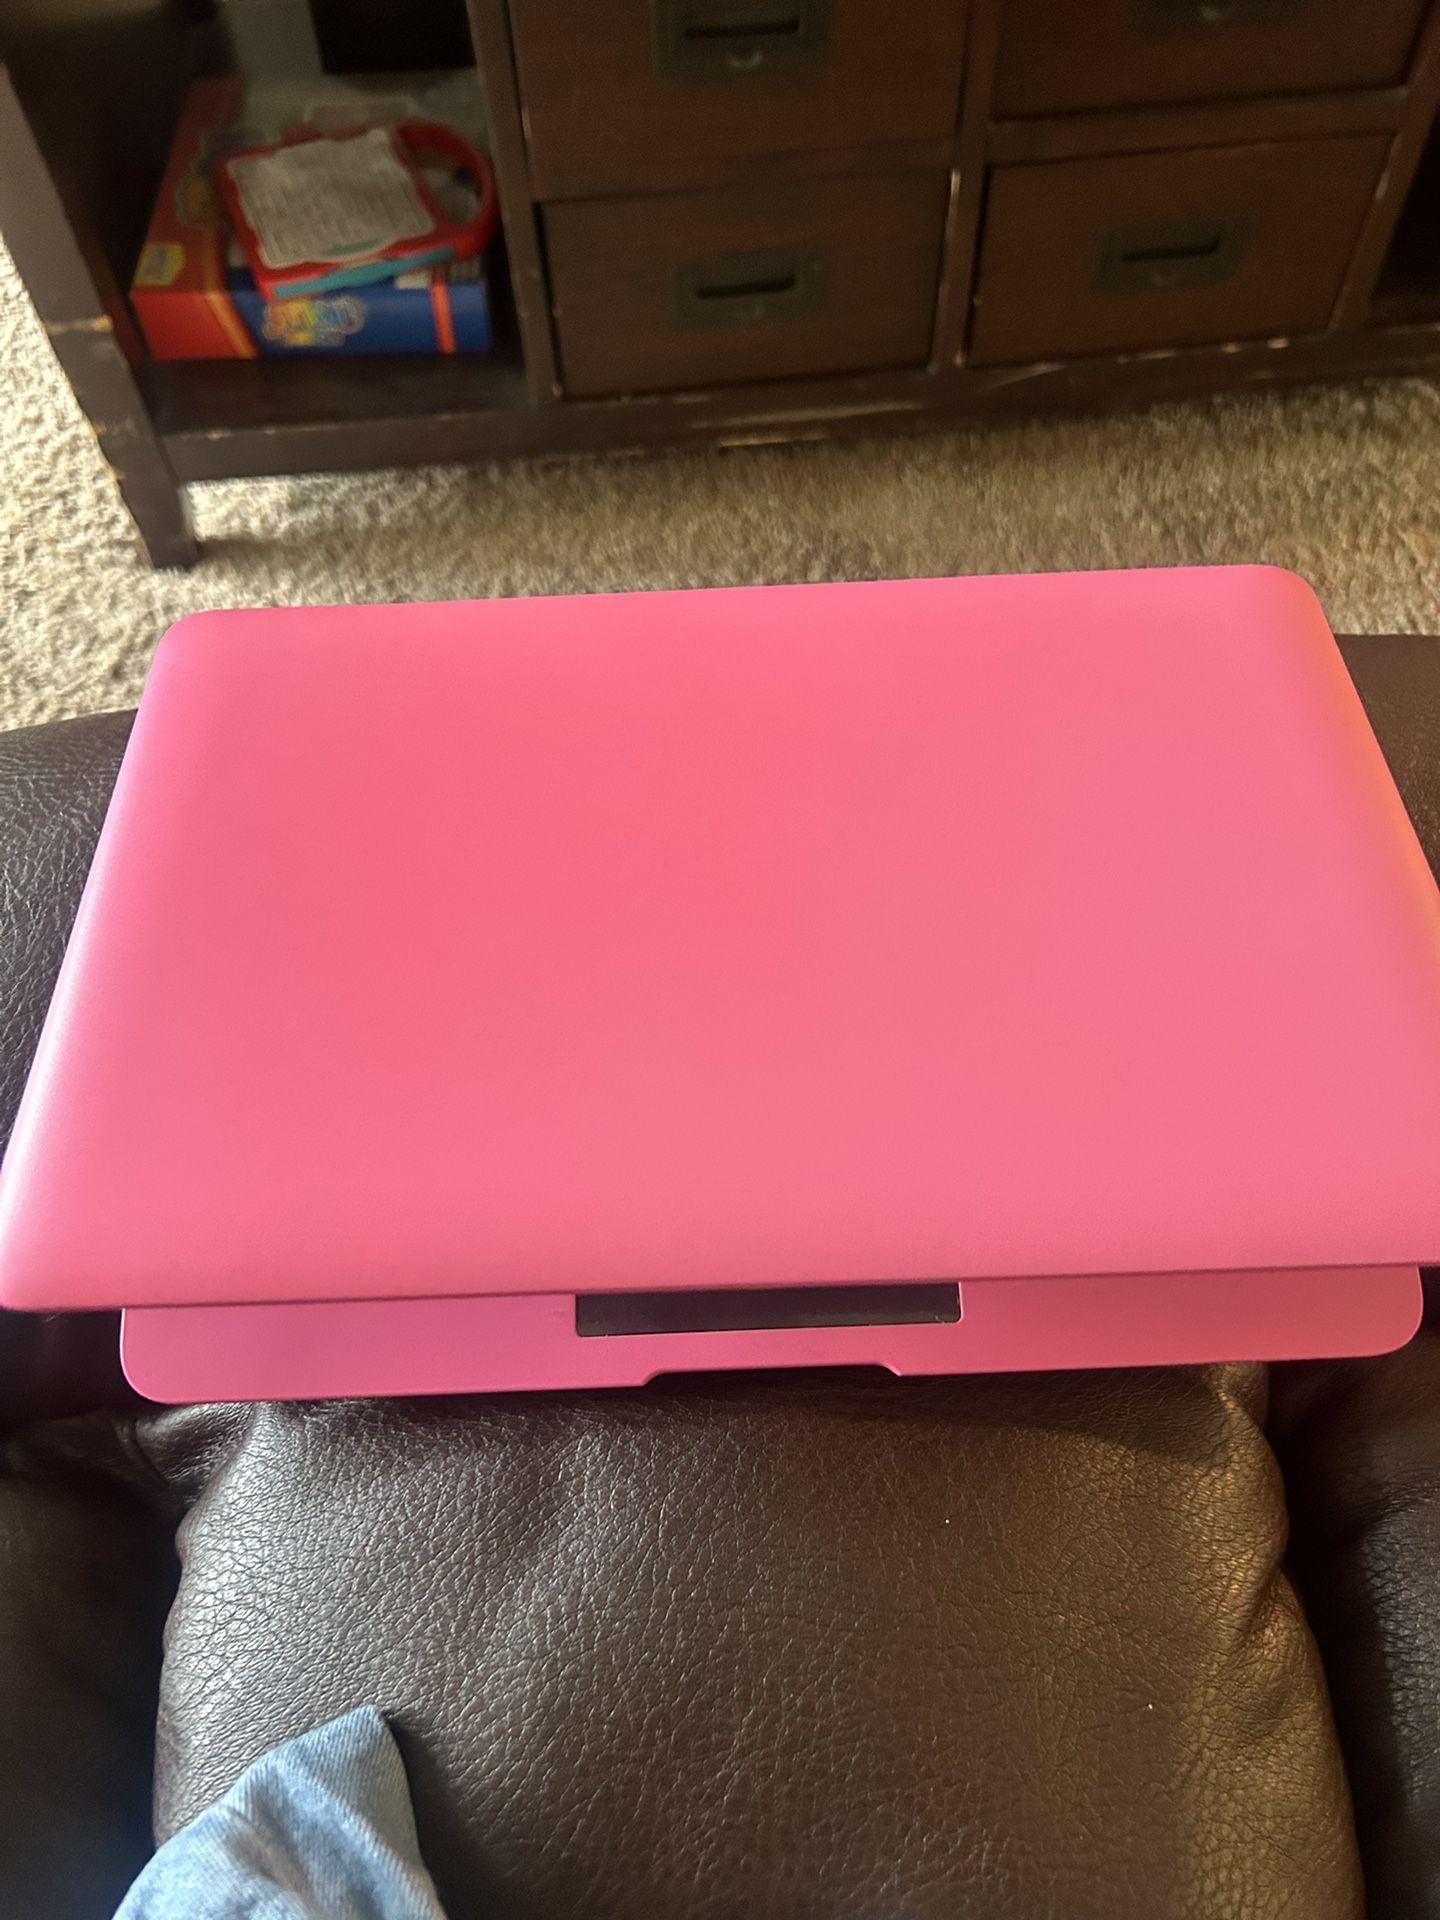 Acer 10.1 inch portable laptop 